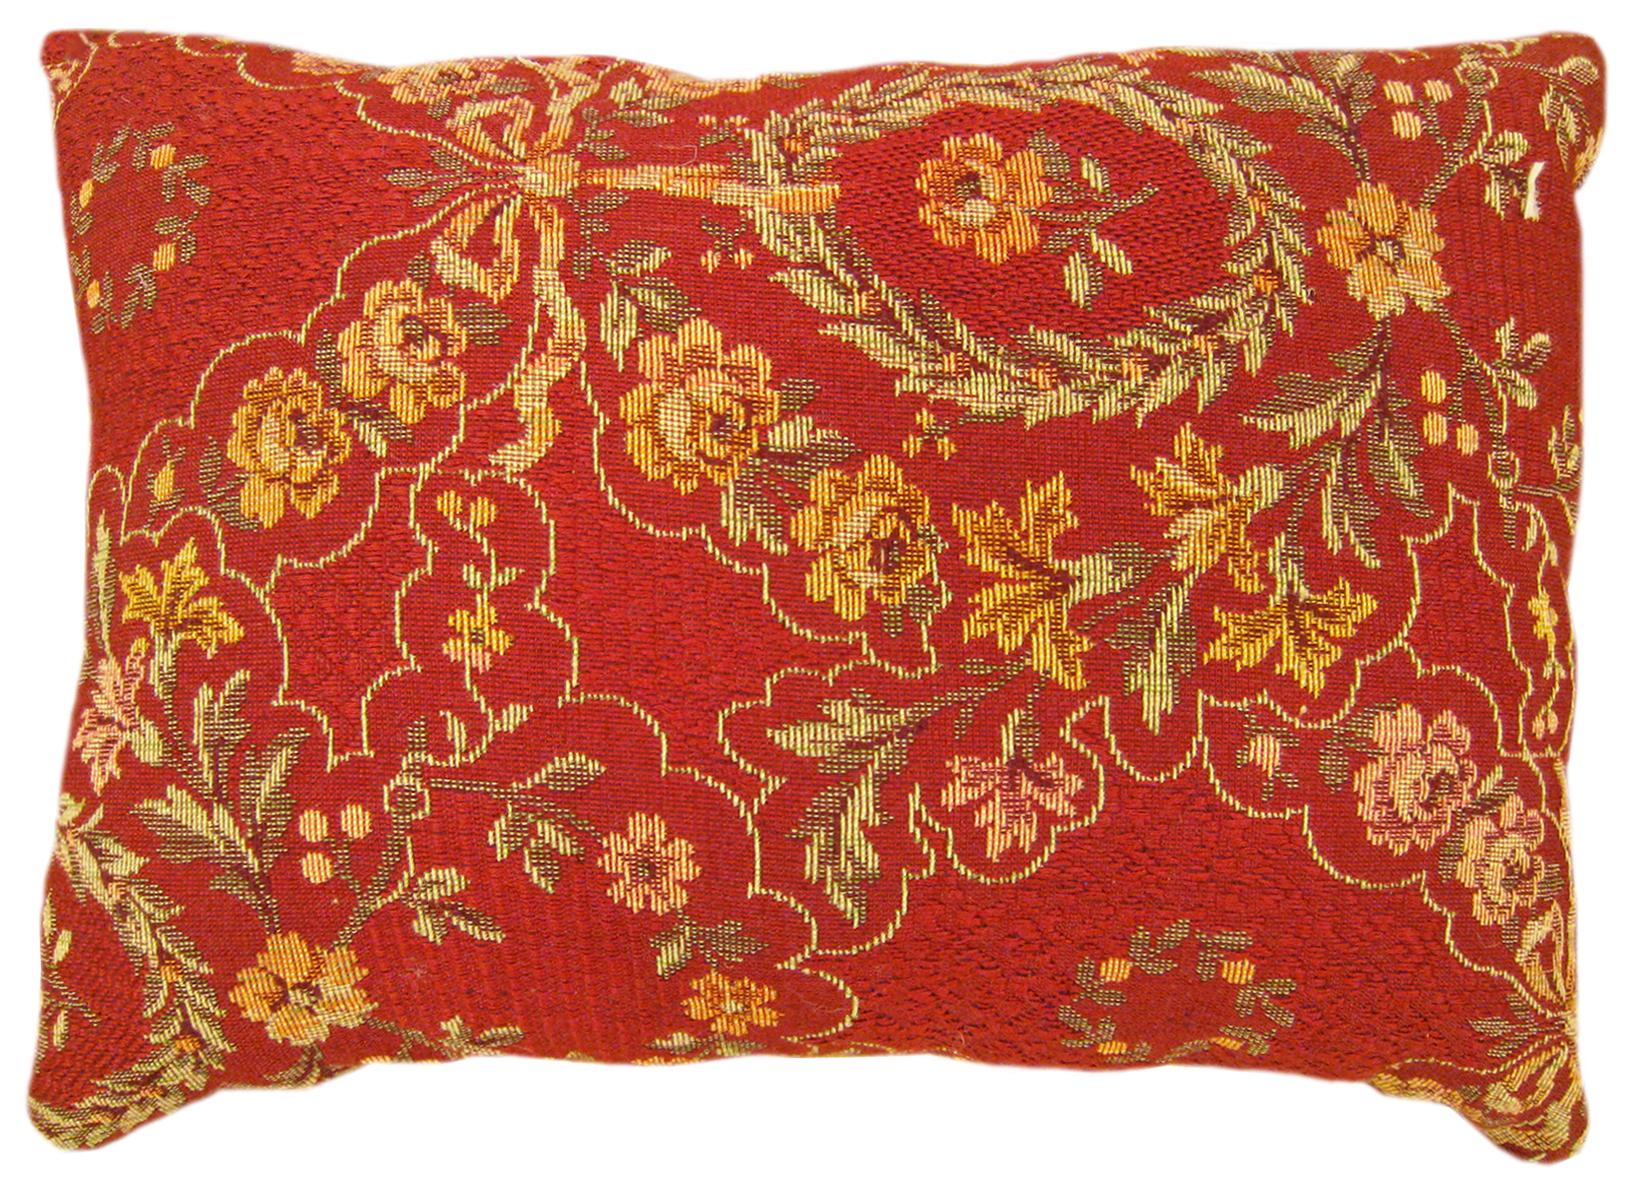 Early 20th Century A Pair of Decorative Antique Jacquard Tapestry Pillows with Floral Elements  For Sale